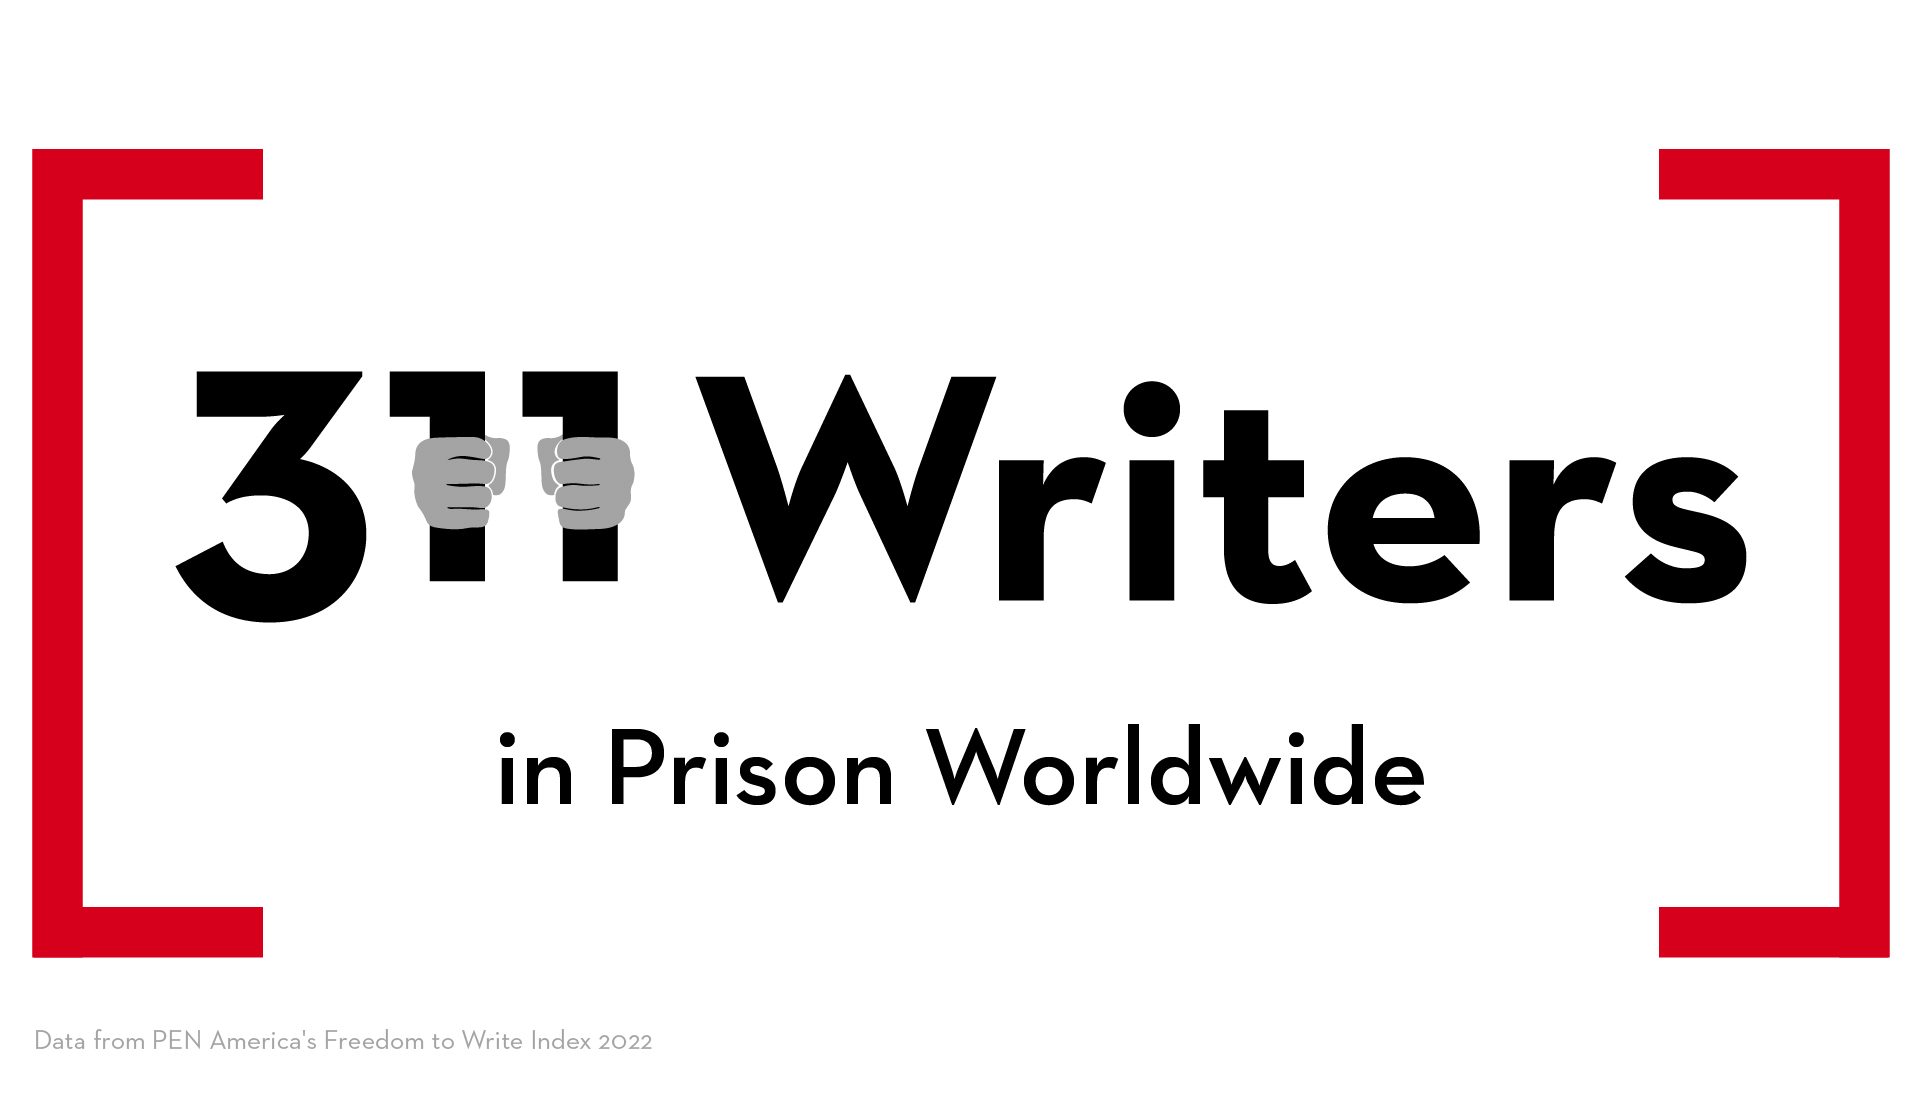 Red brackets contain the text: 311 writers in prison worldwide